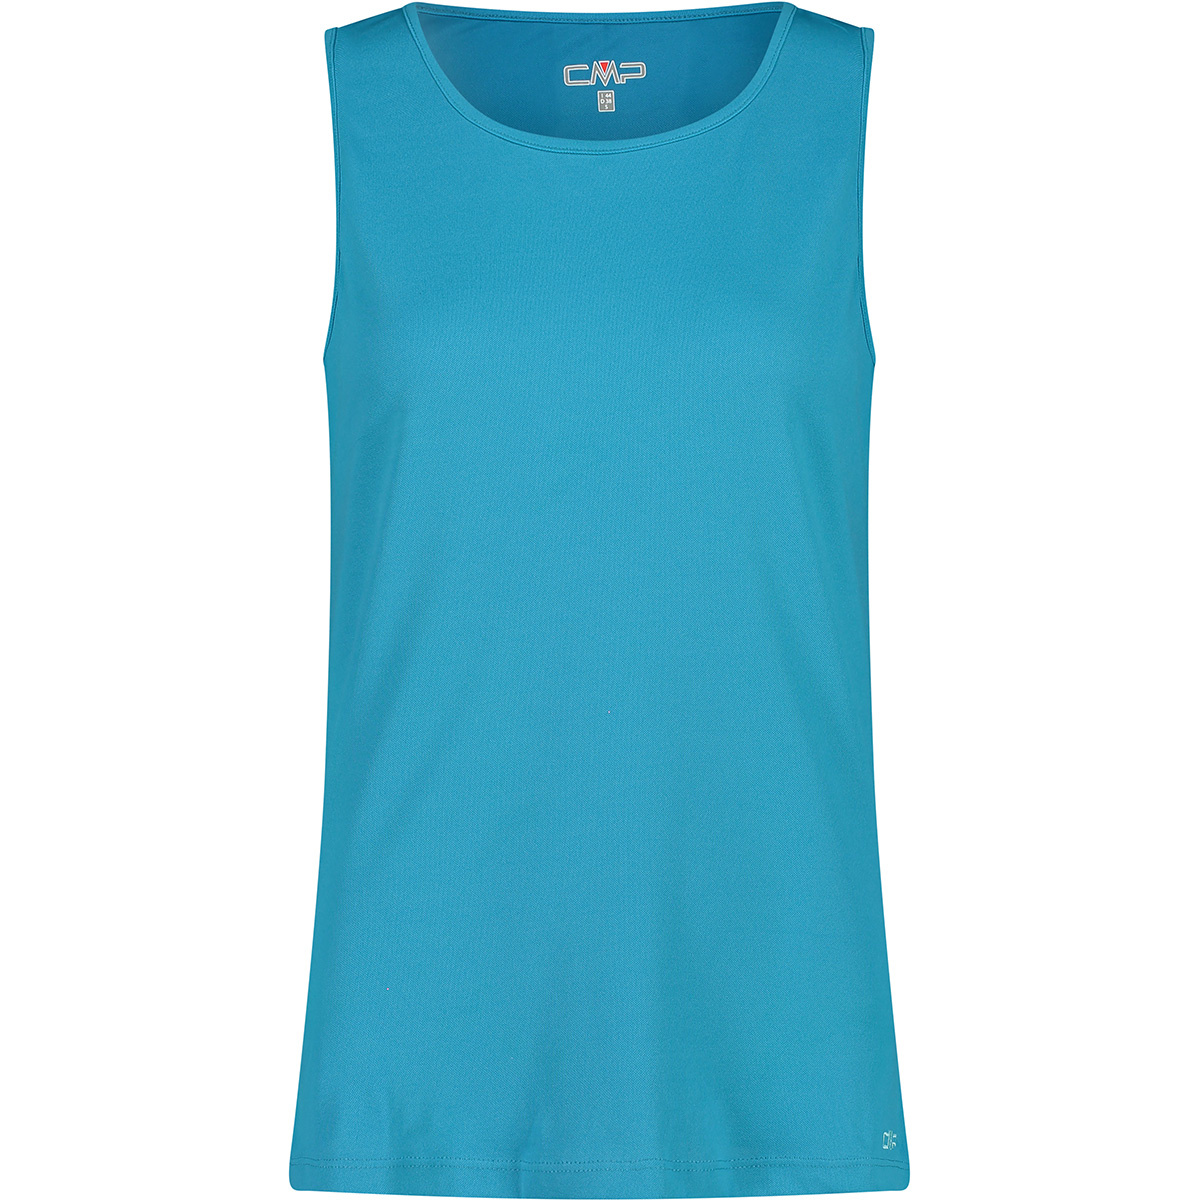 Image of CMP Donna Tank top funzionale